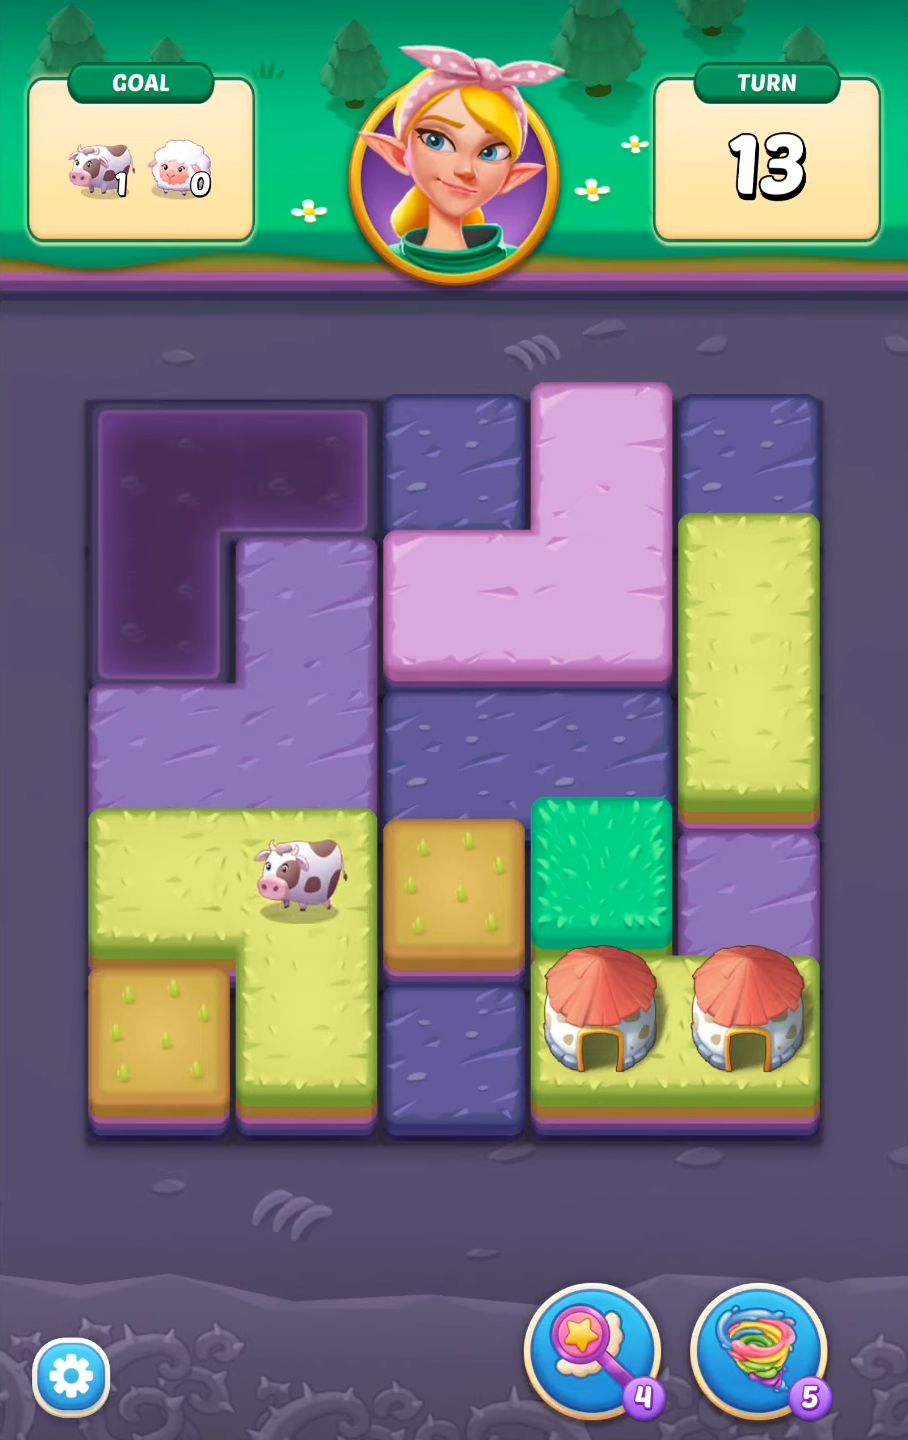 Gameplay of the Merge Farm : Animal Rescue for Android phone or tablet.